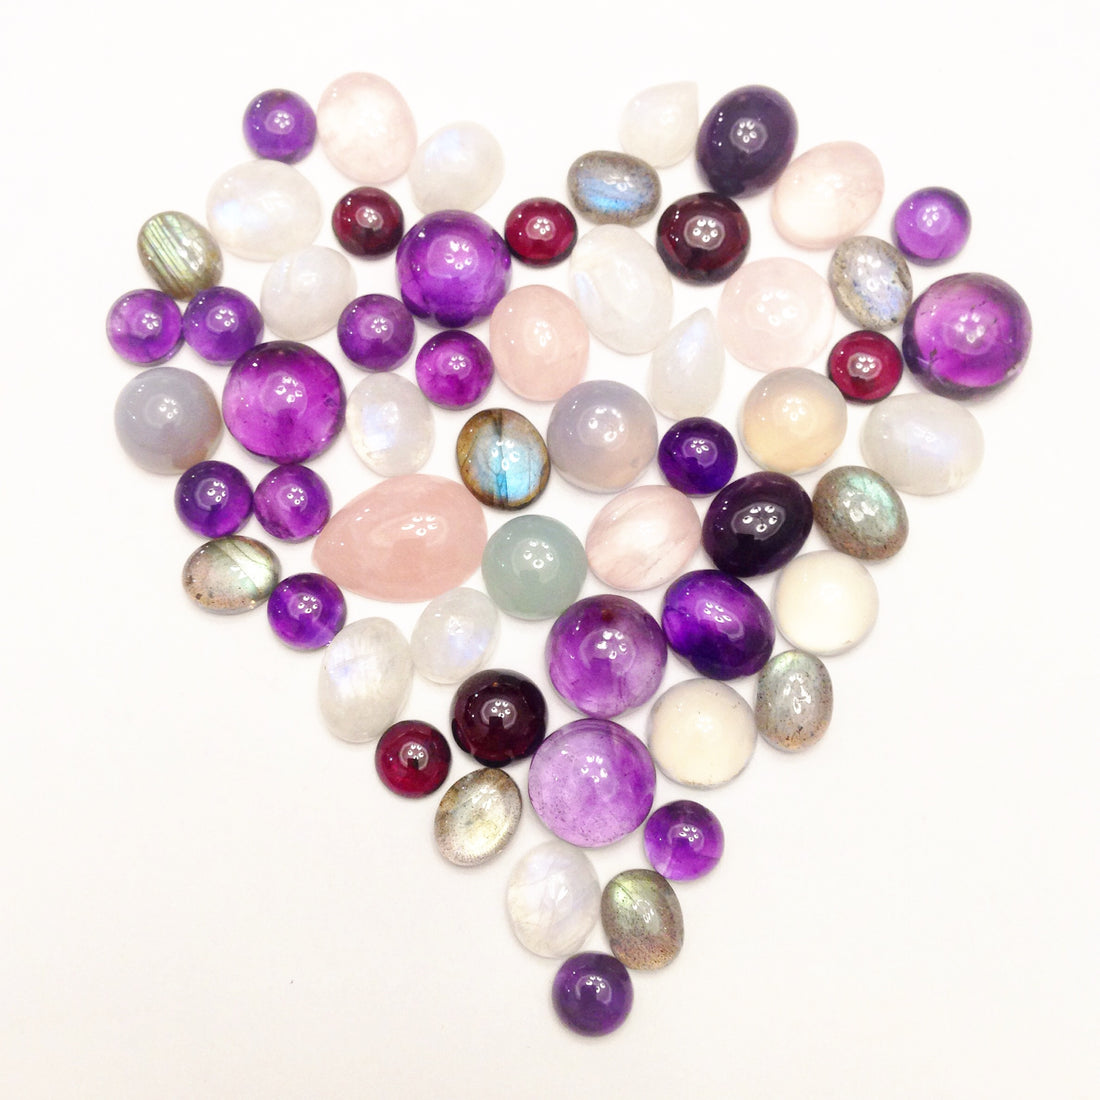 For the Love of Gemstones